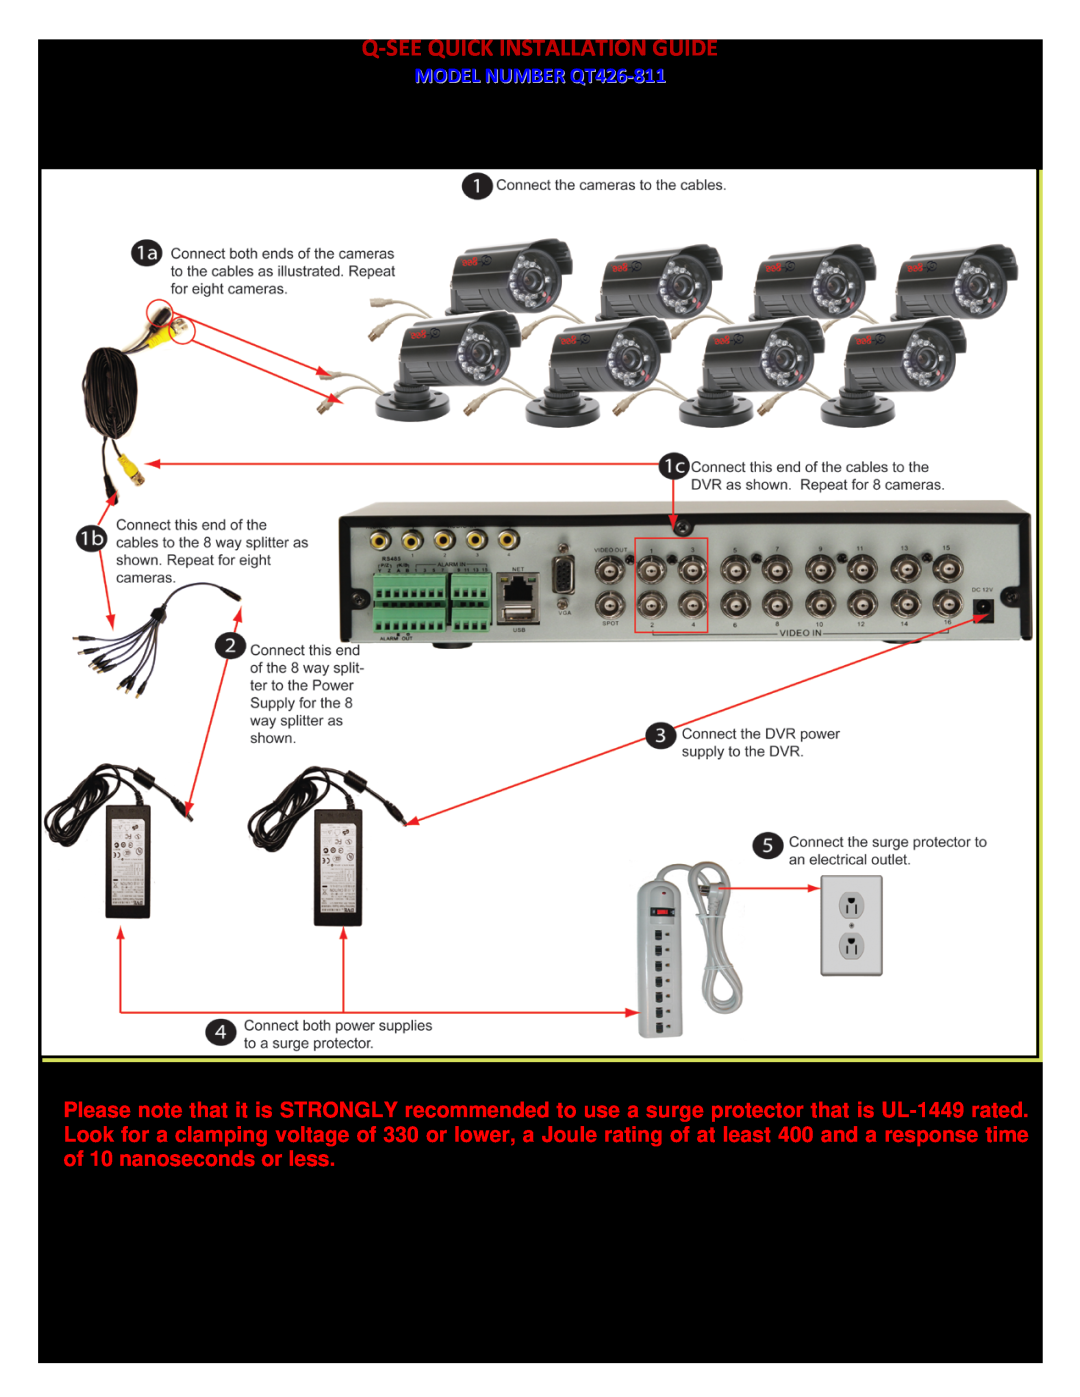 Q-See QT428-811 PART 2 - DVR CAMERA AND POWER CONNECTIONS, P a g e, Q-See Quick Installation Guide, MODEL NUMBER QT426-811 